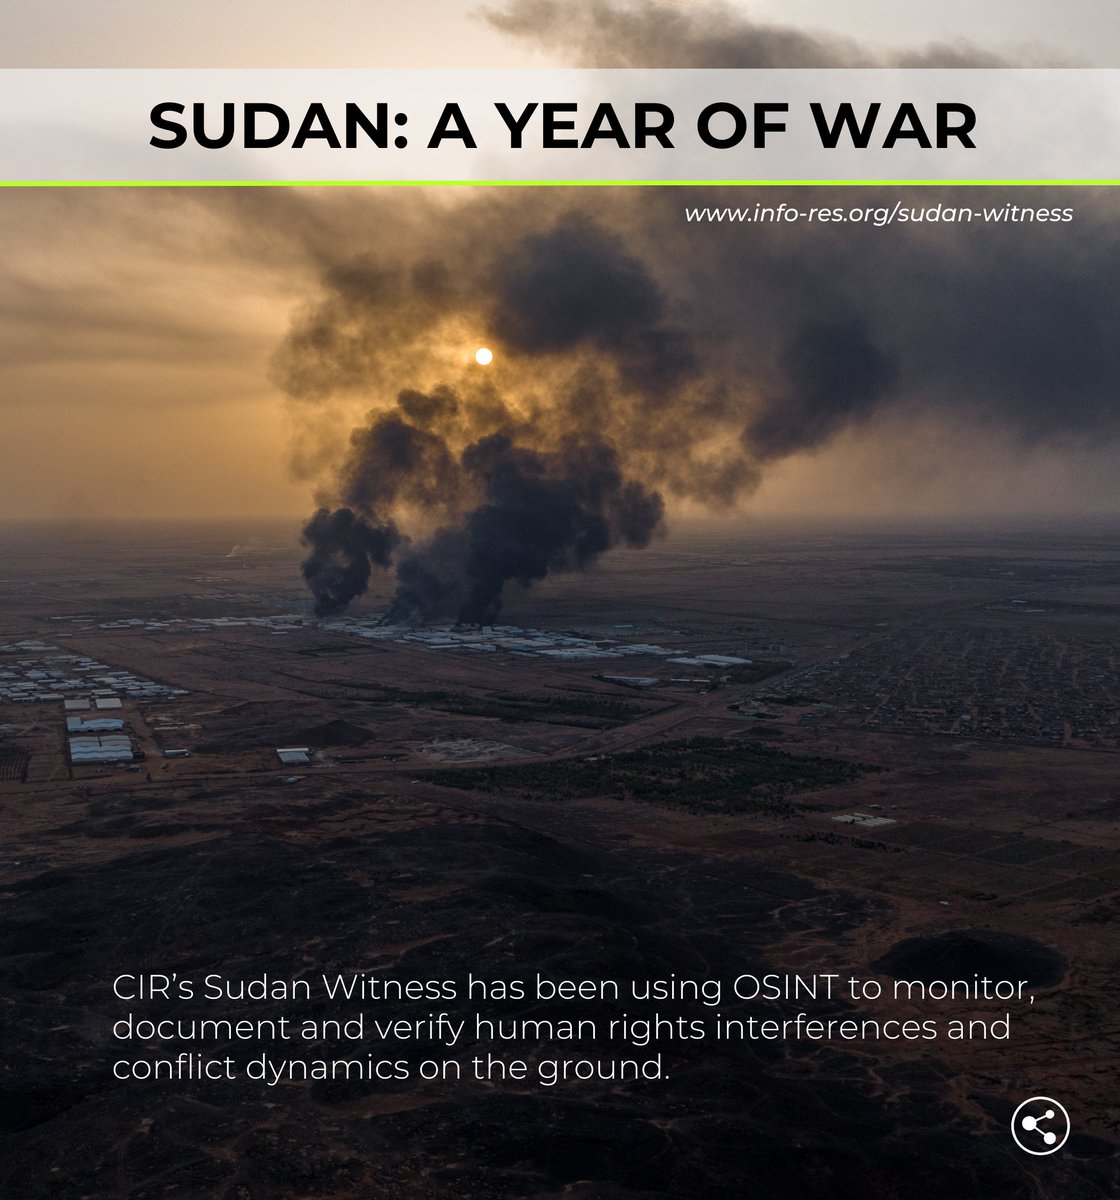 Today marks one year since the war broke out in Sudan. The following thread shows the scale of violence taking place across #Sudan since April 2023 and the devastation the conflict has brought to the country. ⬇️